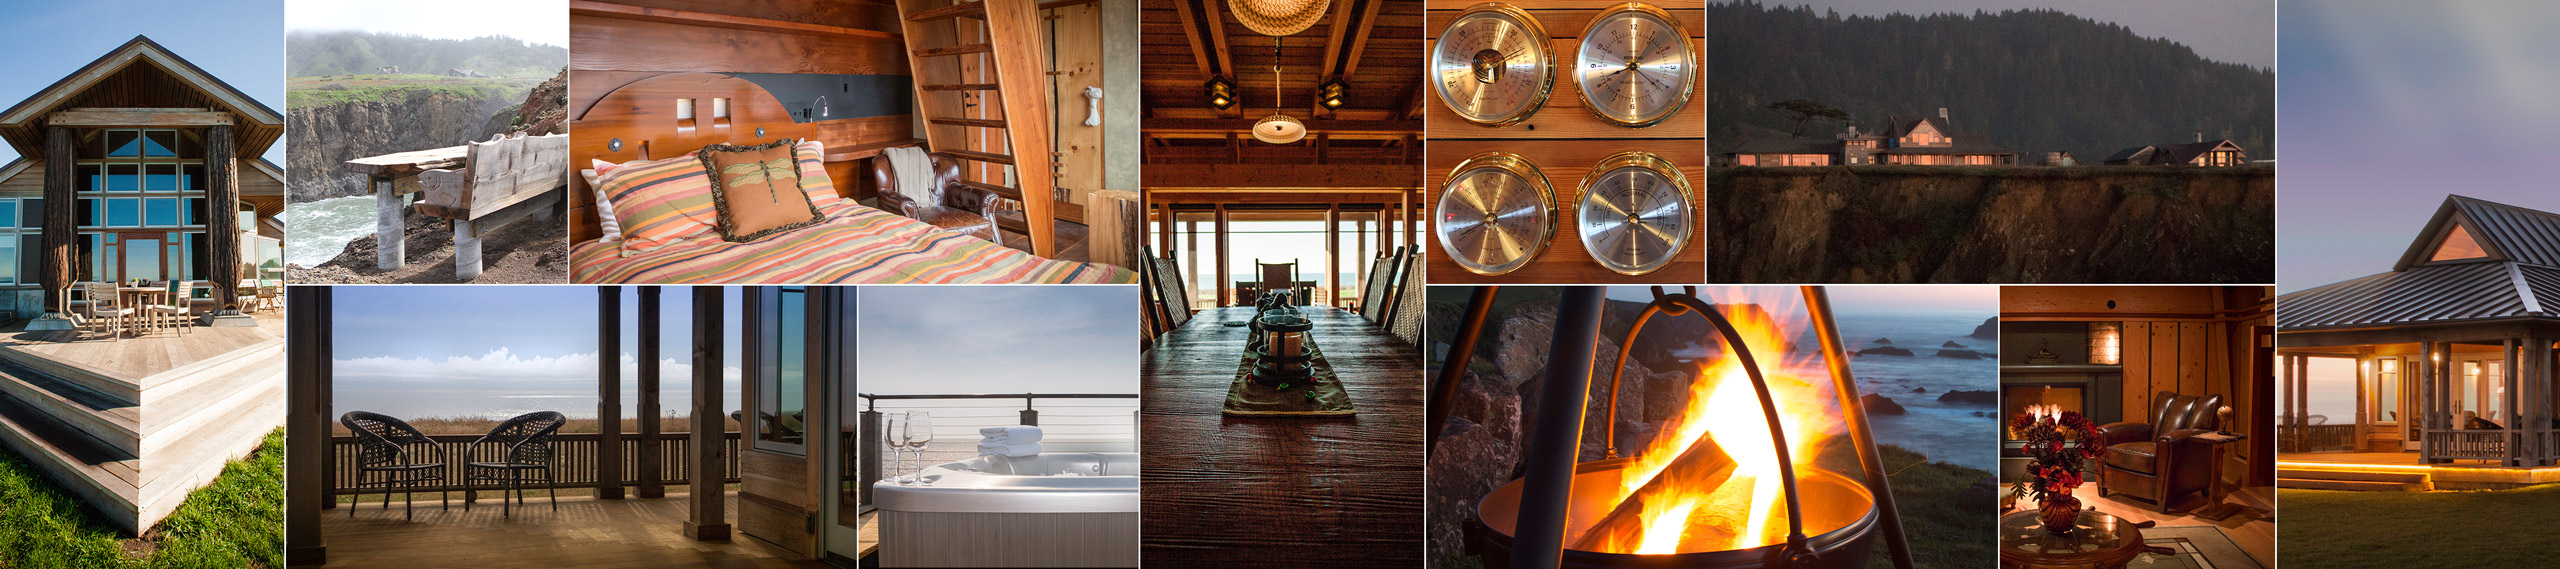                             Rustic luxe: The Inn at Newport Ranch